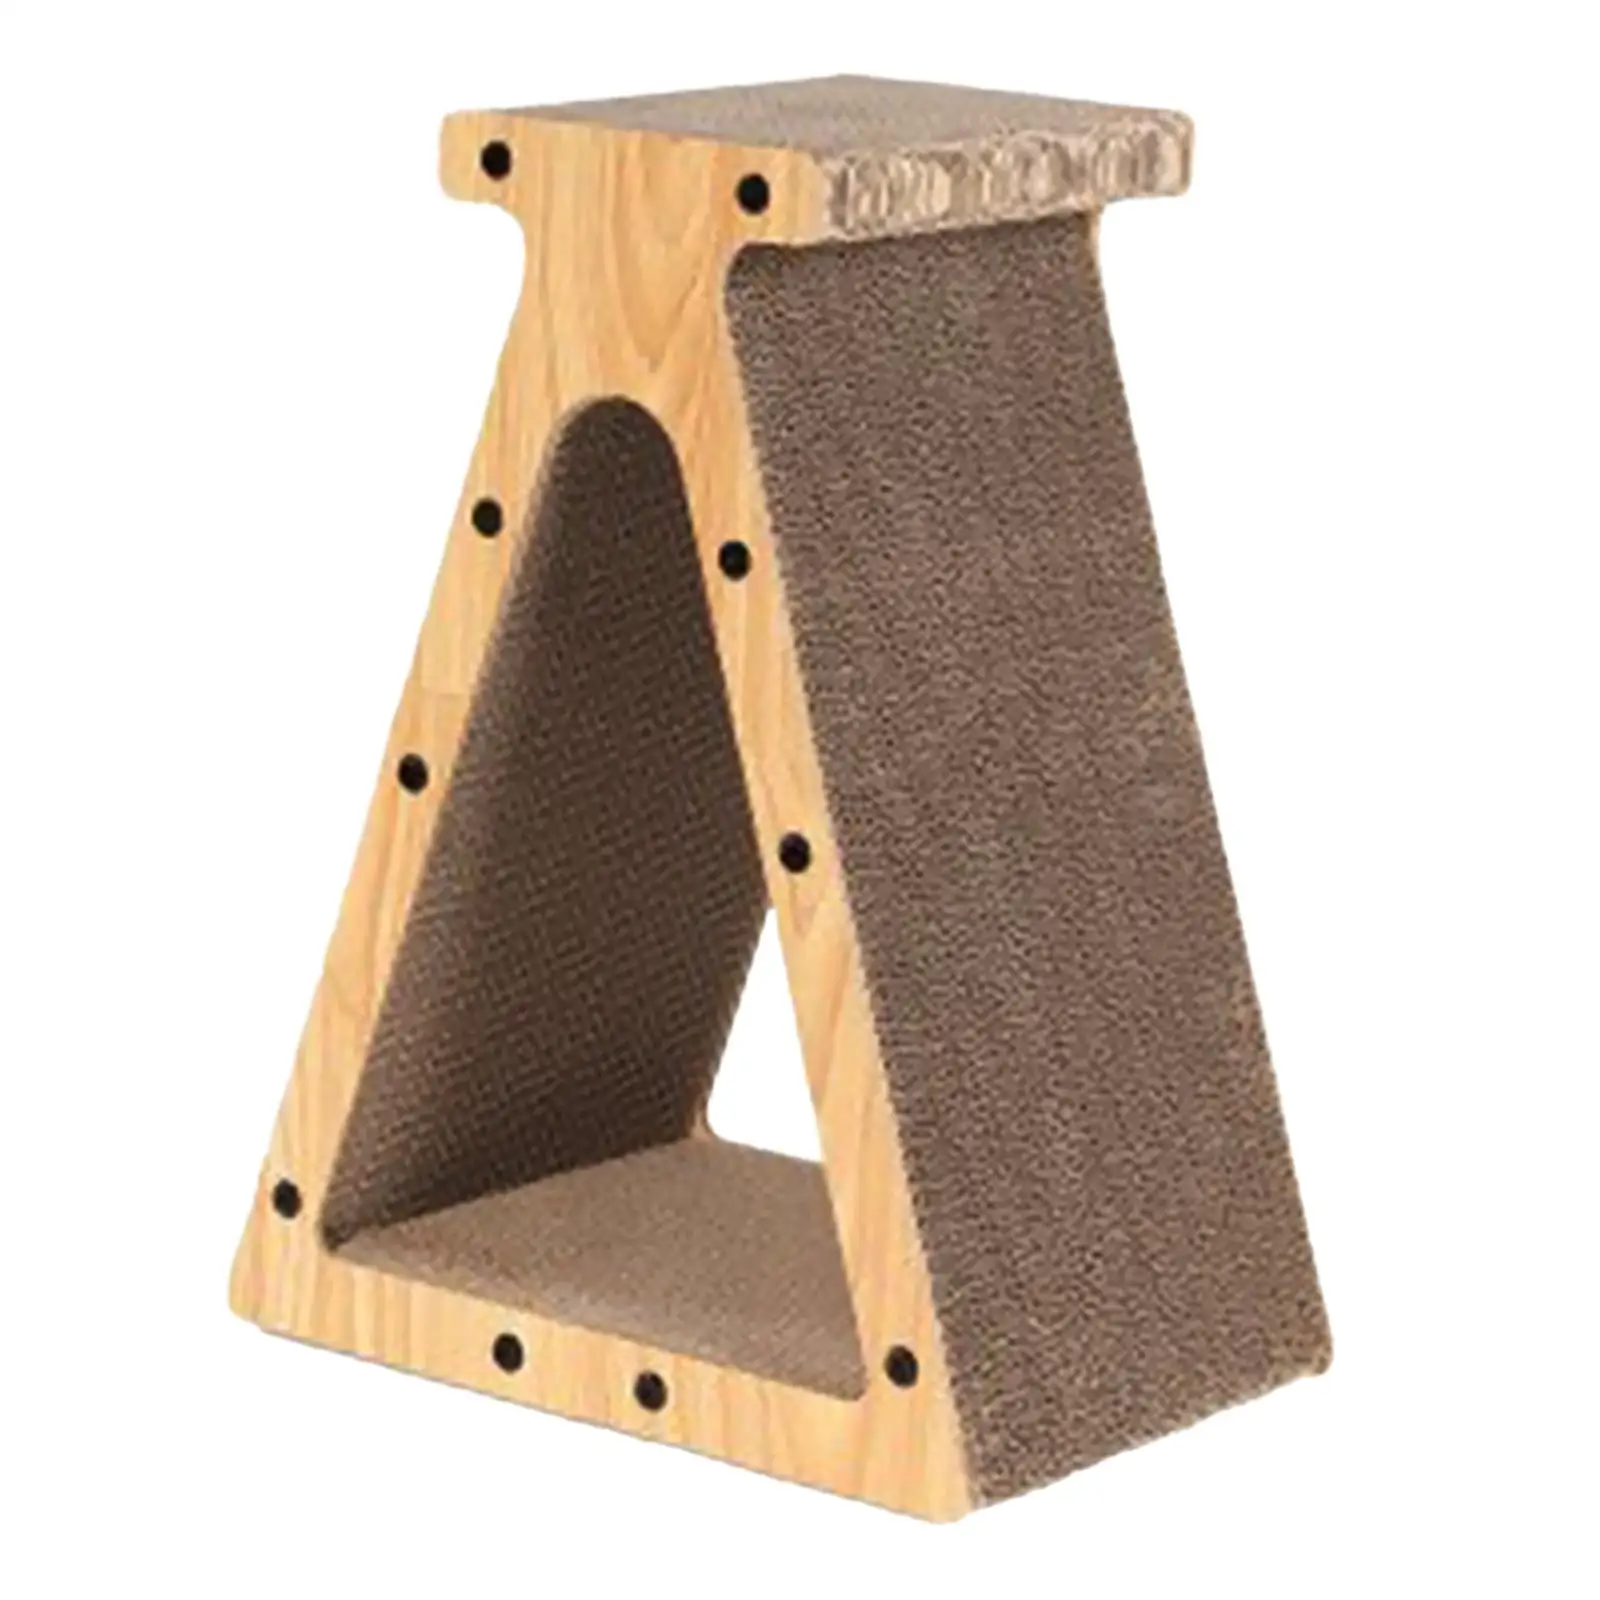 Cat Scratcher Cardboard Recycle Board Scratching Bed Scratching Toy Scratch Pad Corrugated Scratch Pad for Furniture Protector